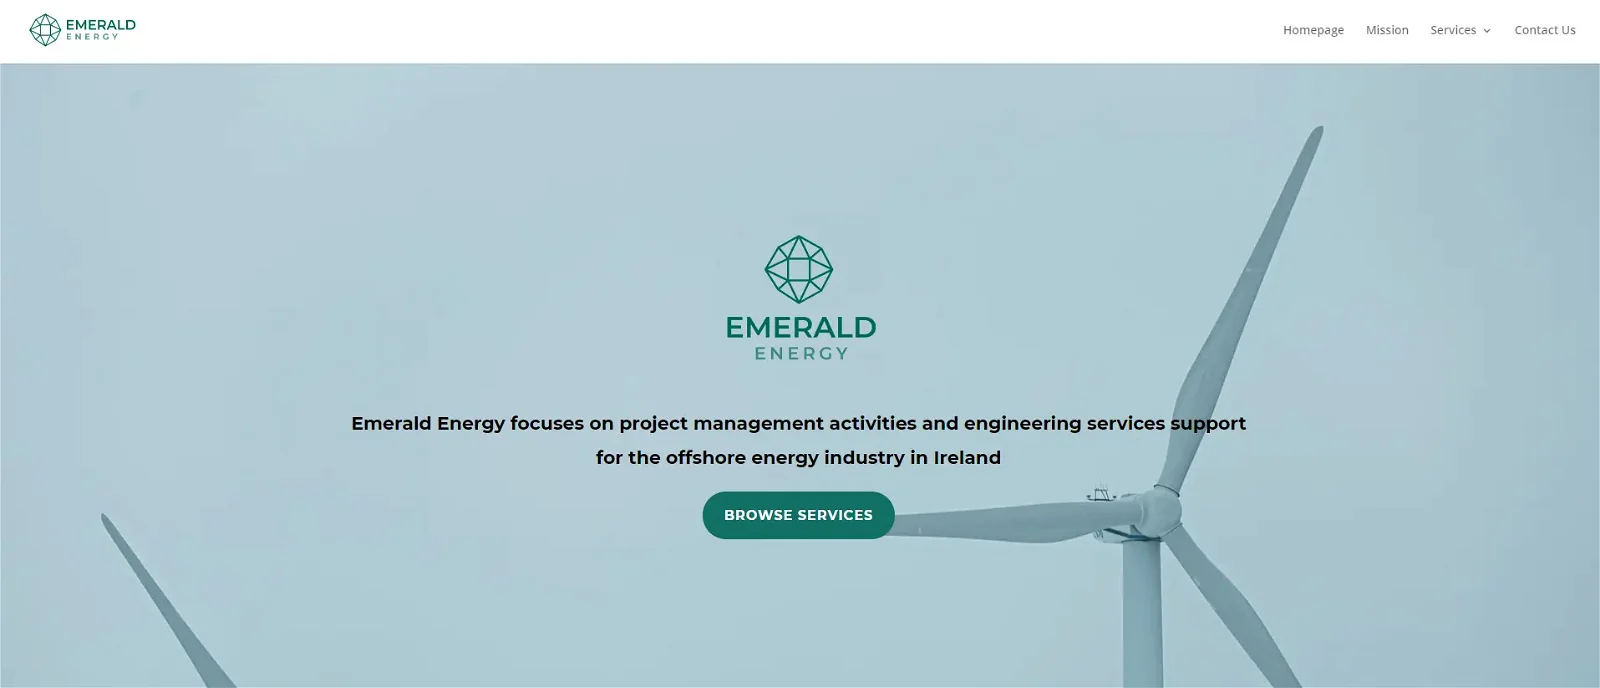 This image is the homepage of Emerald Energy, which provides project management activities and engineering services support for the offshore energy industry in Ireland.